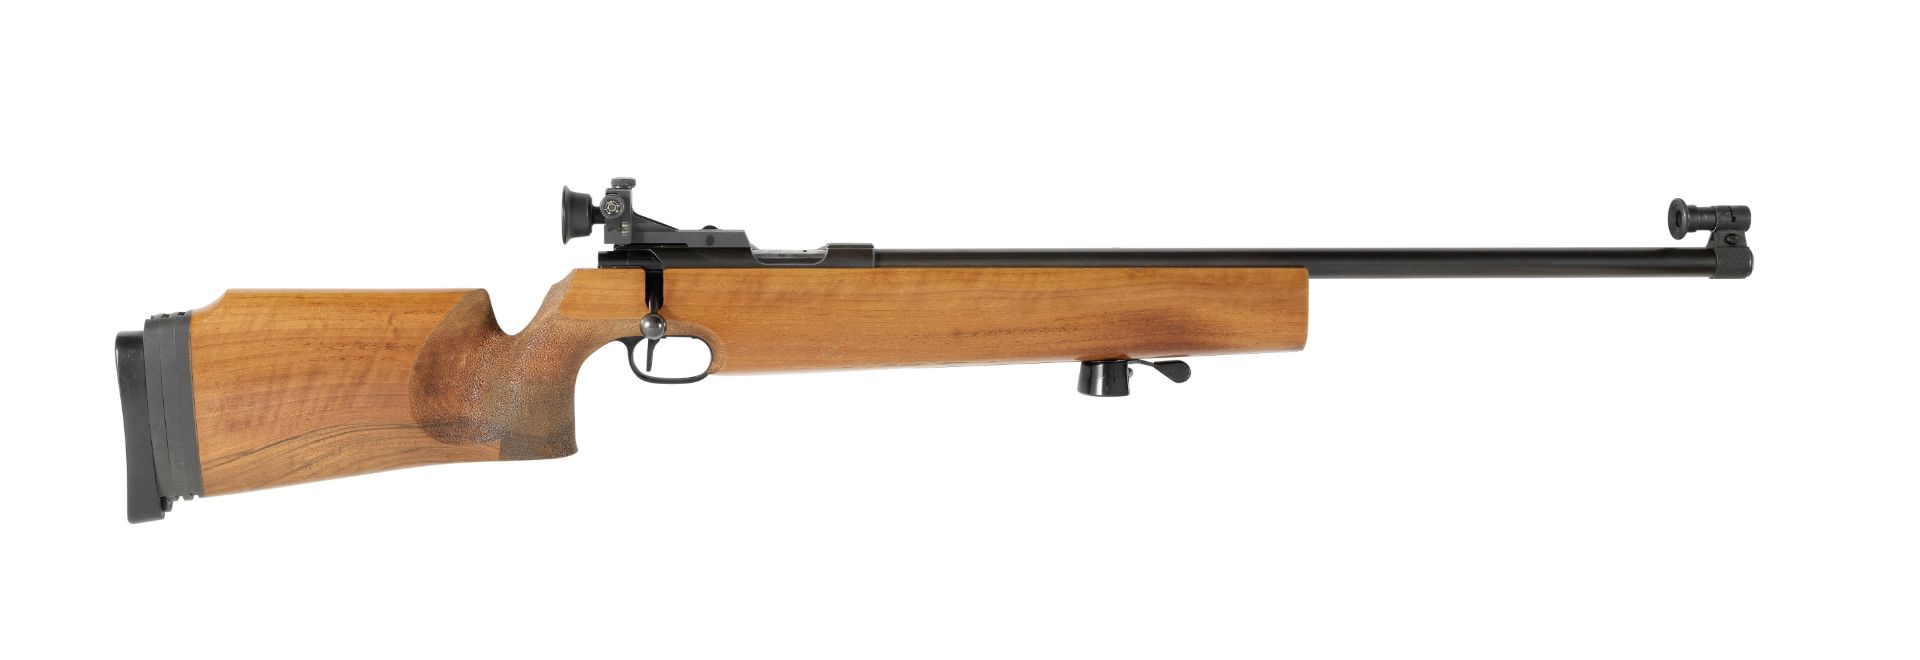 A .22 (L.R.) single-shot bolt-action target rifle by Walther, no. 12378